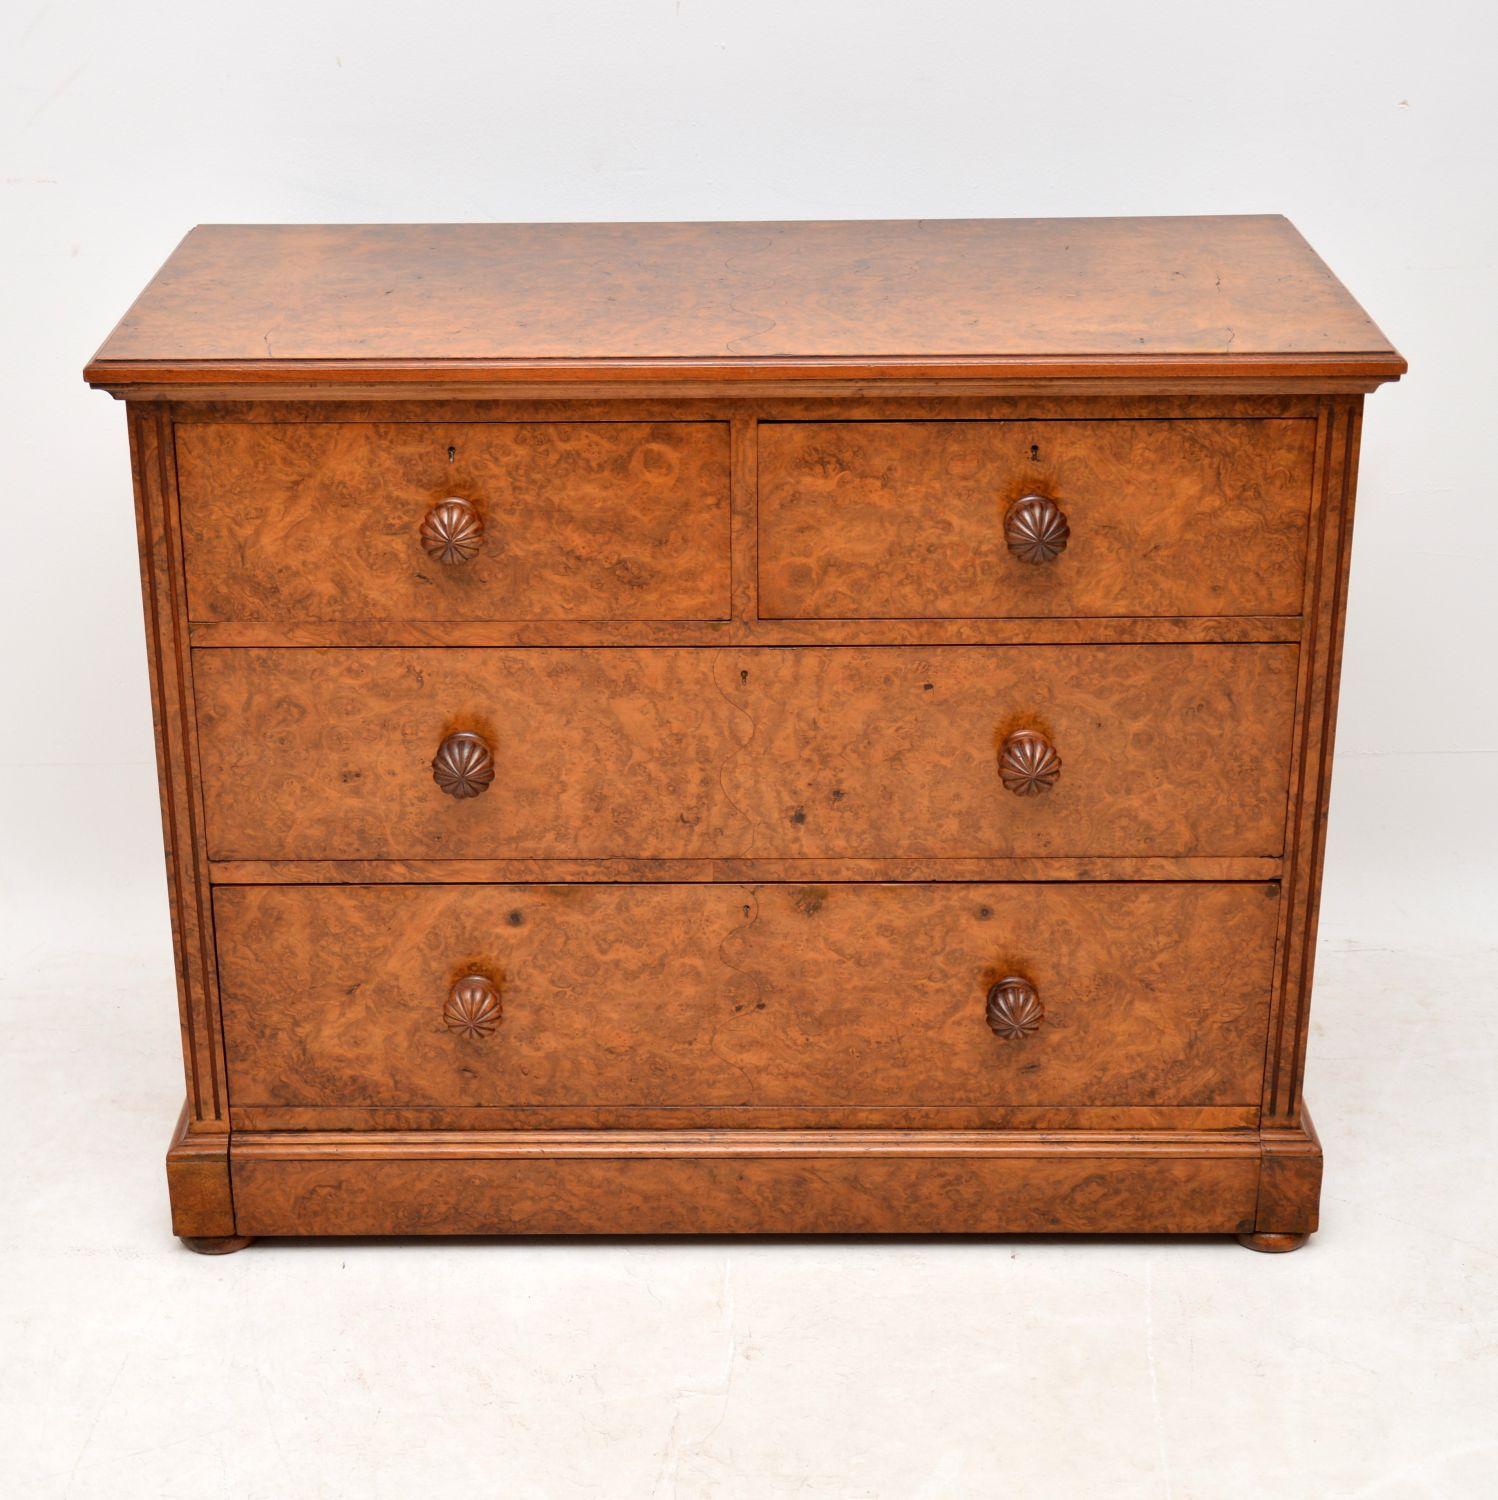 A very fine antique early Victorian burr walnut chest of drawers made James Shoolbred who was one of the finest Victorian London cabinet makers. It’s in total original excellent condition and has a wonderful color, patina and pattern to the burr